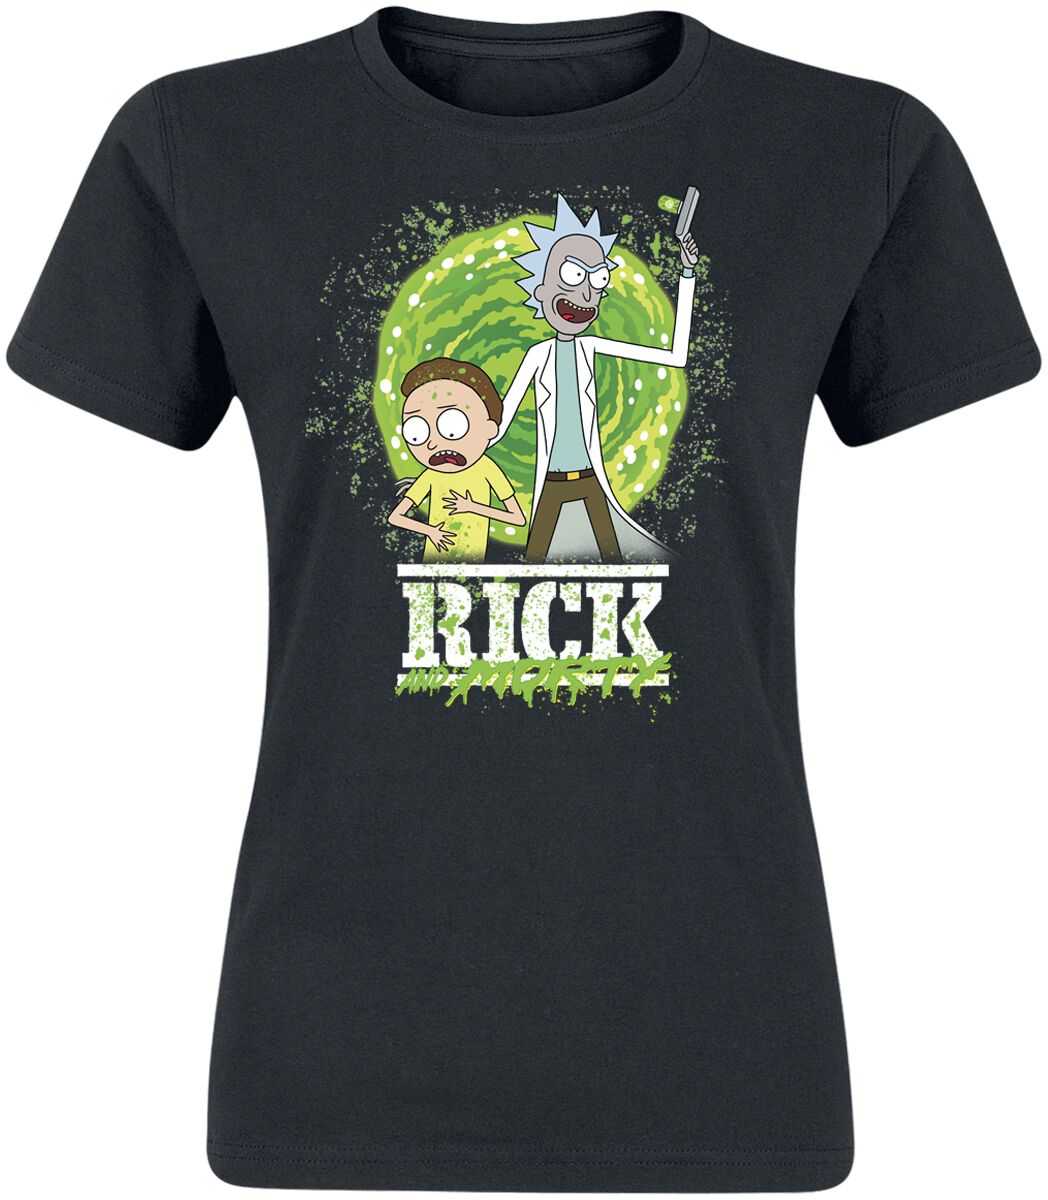 Rick And Morty Season 6 T-Shirt schwarz in S